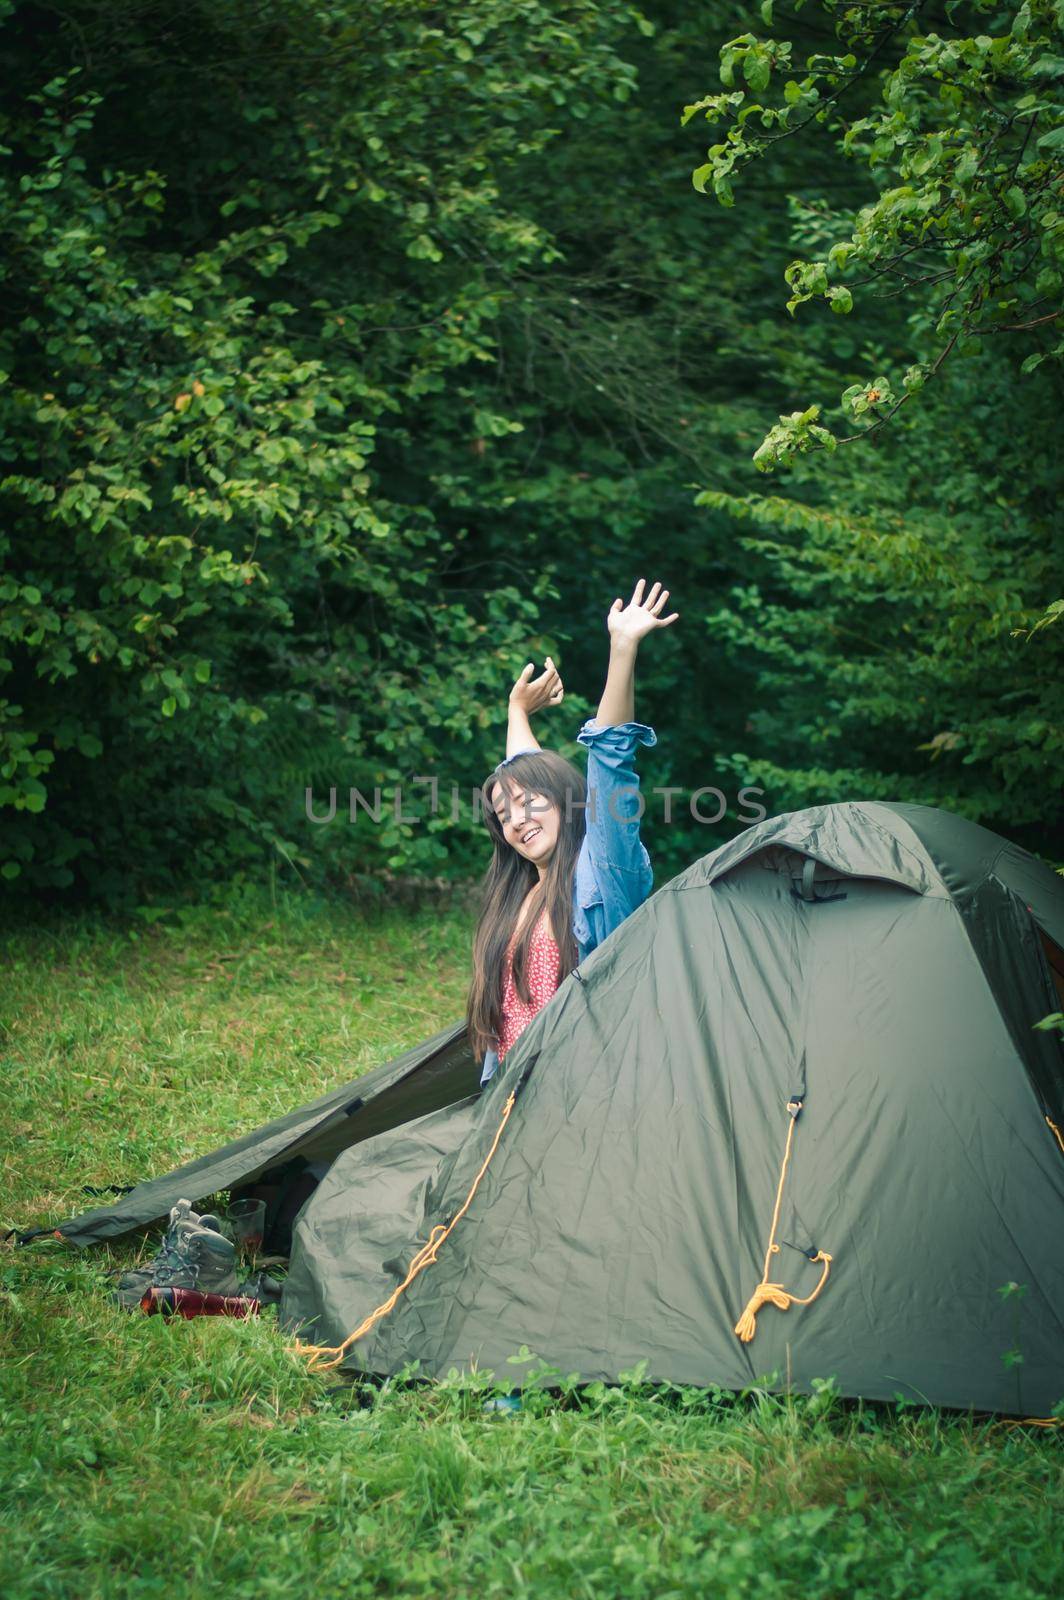 woman among the mountains near the tent enjoys nature. High quality photo